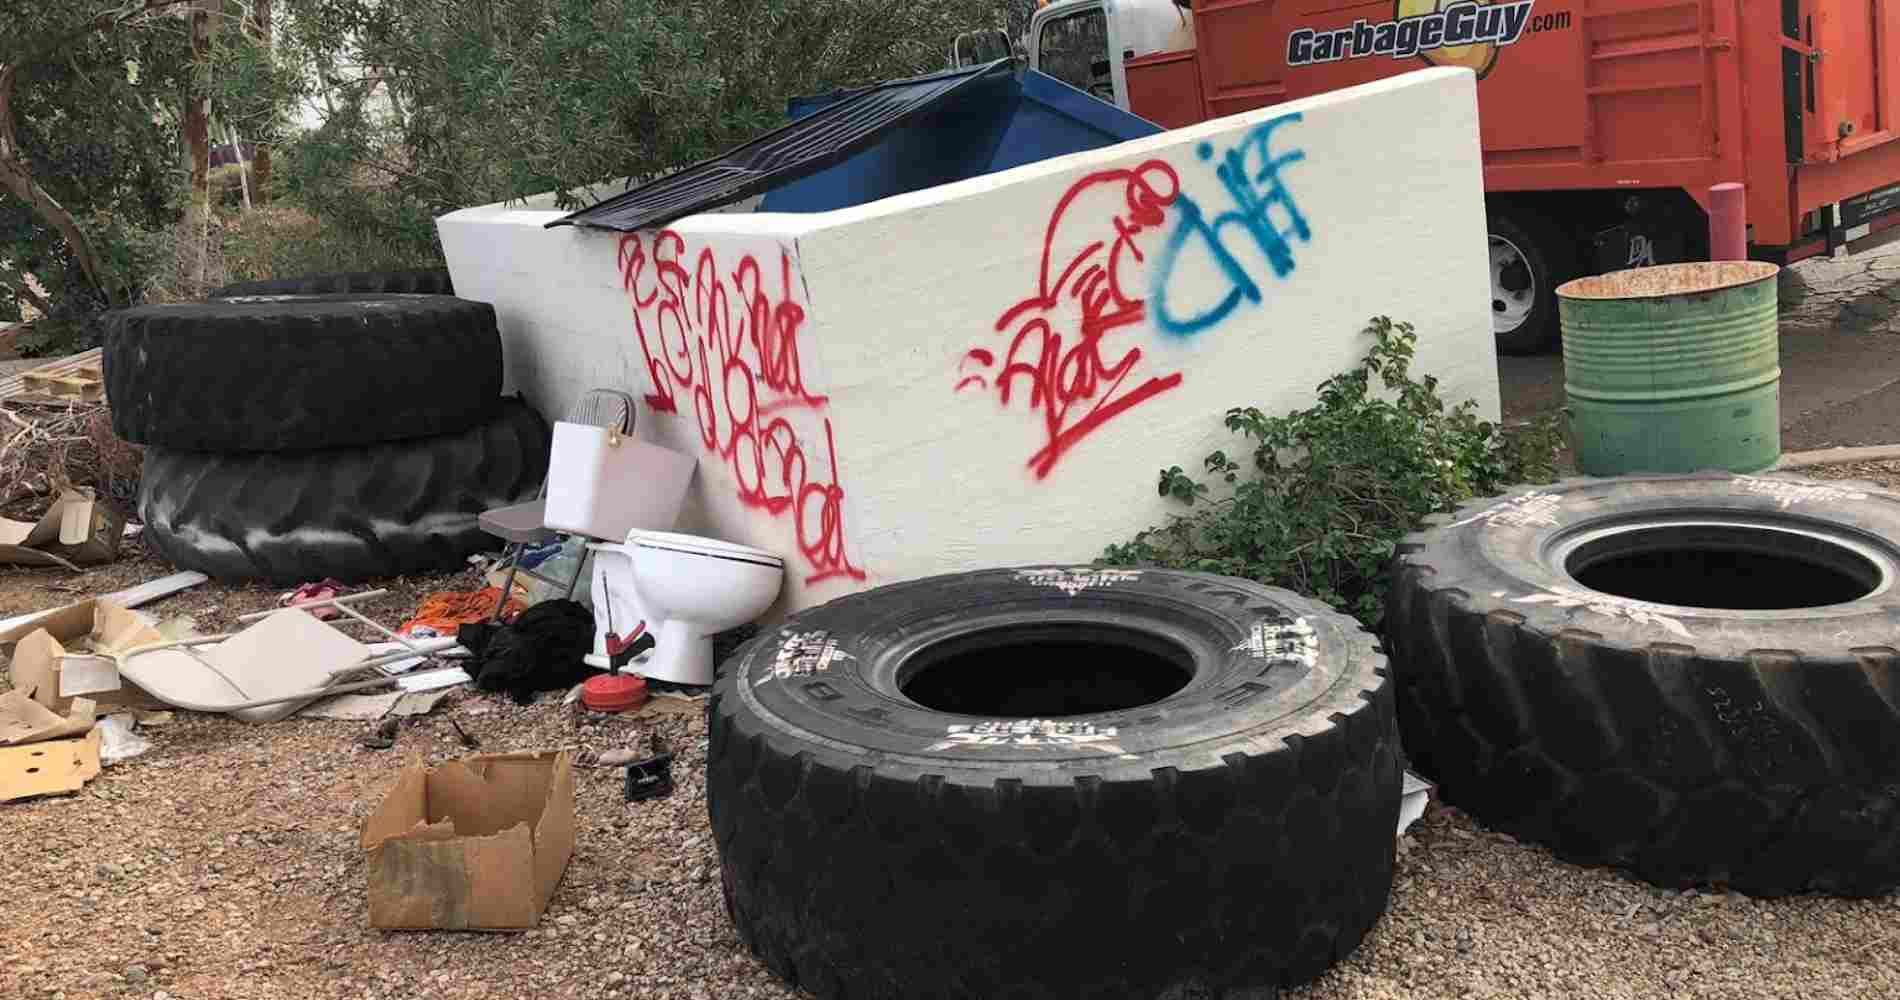 #1 for Tire Disposal in Tolleson, AZ with Over 1200 5-Star Reviews!